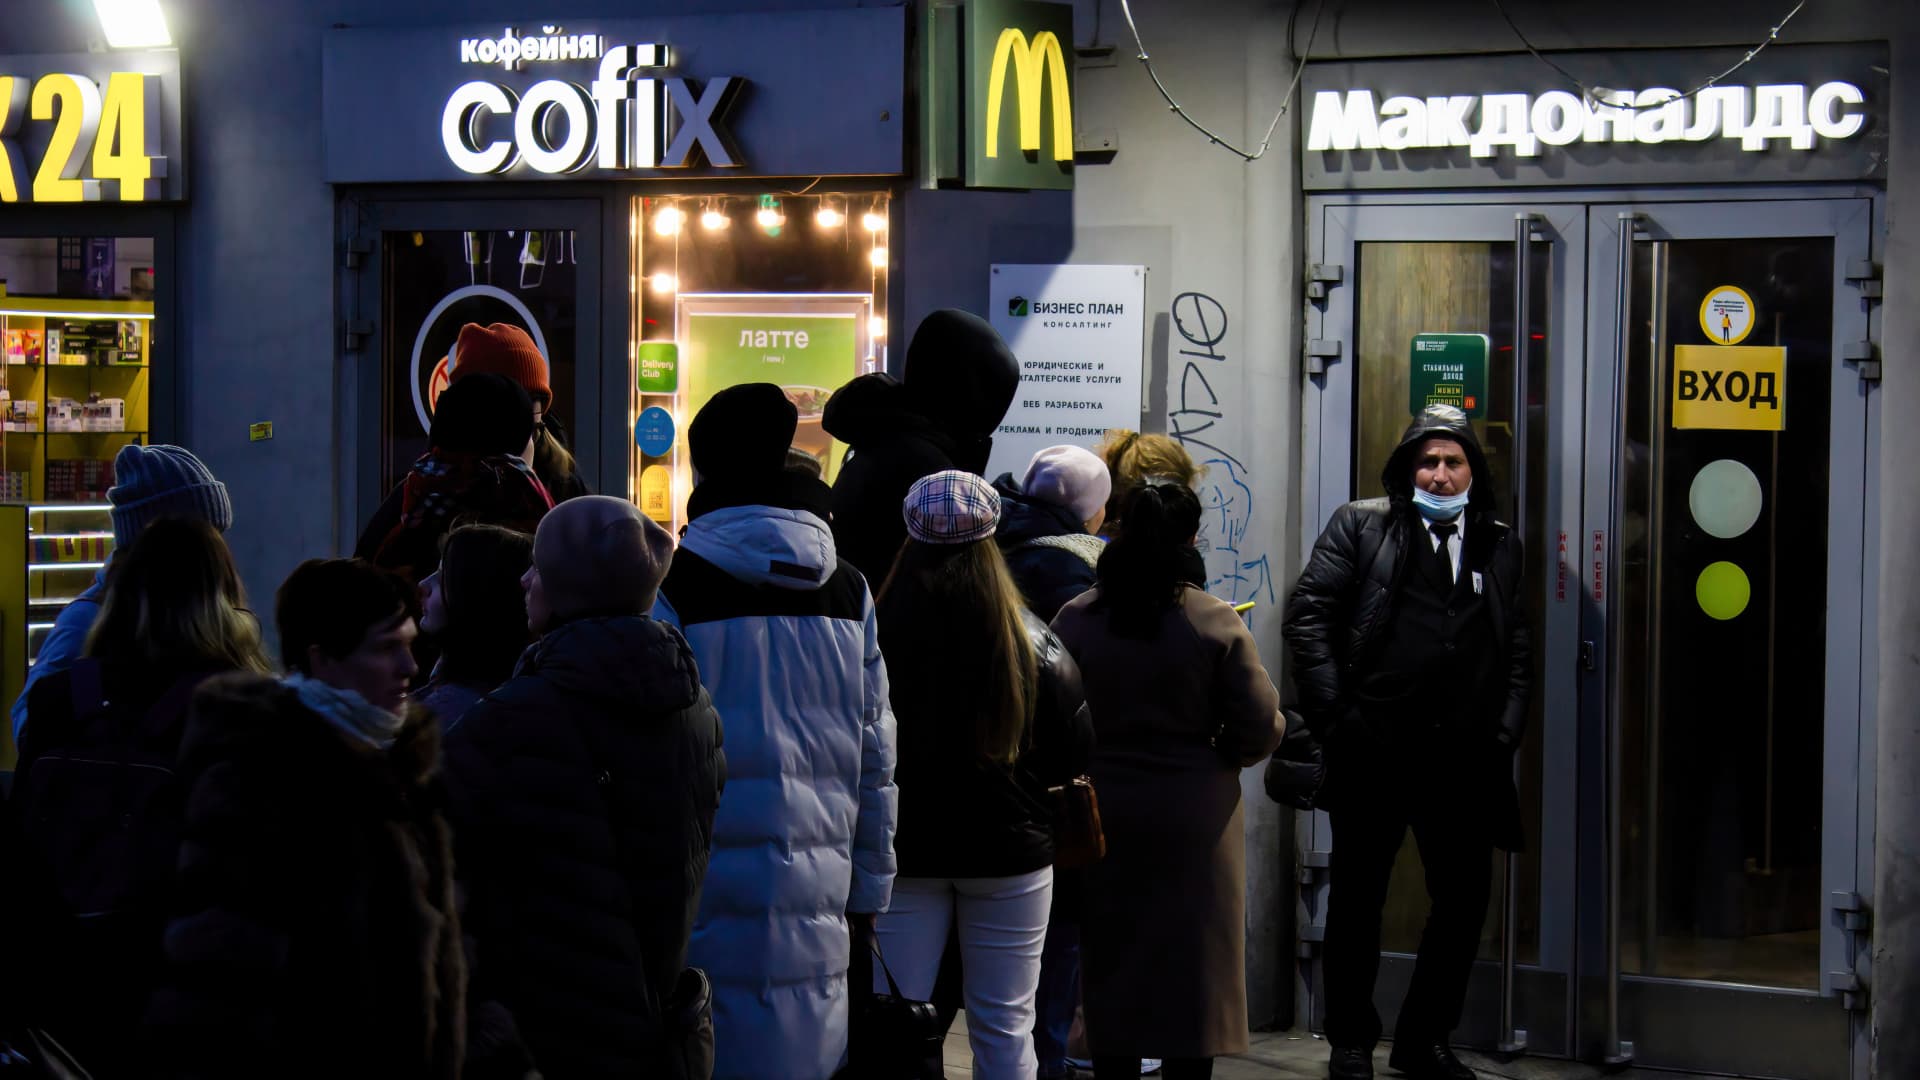 People wait in line to enter a McDonald's restaurant in Moscow on March 11, 2022, after the chain announced it was temporarily closing its 850 restaurants in Russia, joining other foreign brands that have been suspending operations in Russia following the country's military campaign in neighboring Ukraine. McDonald's has since decided to exit Russia permanently.